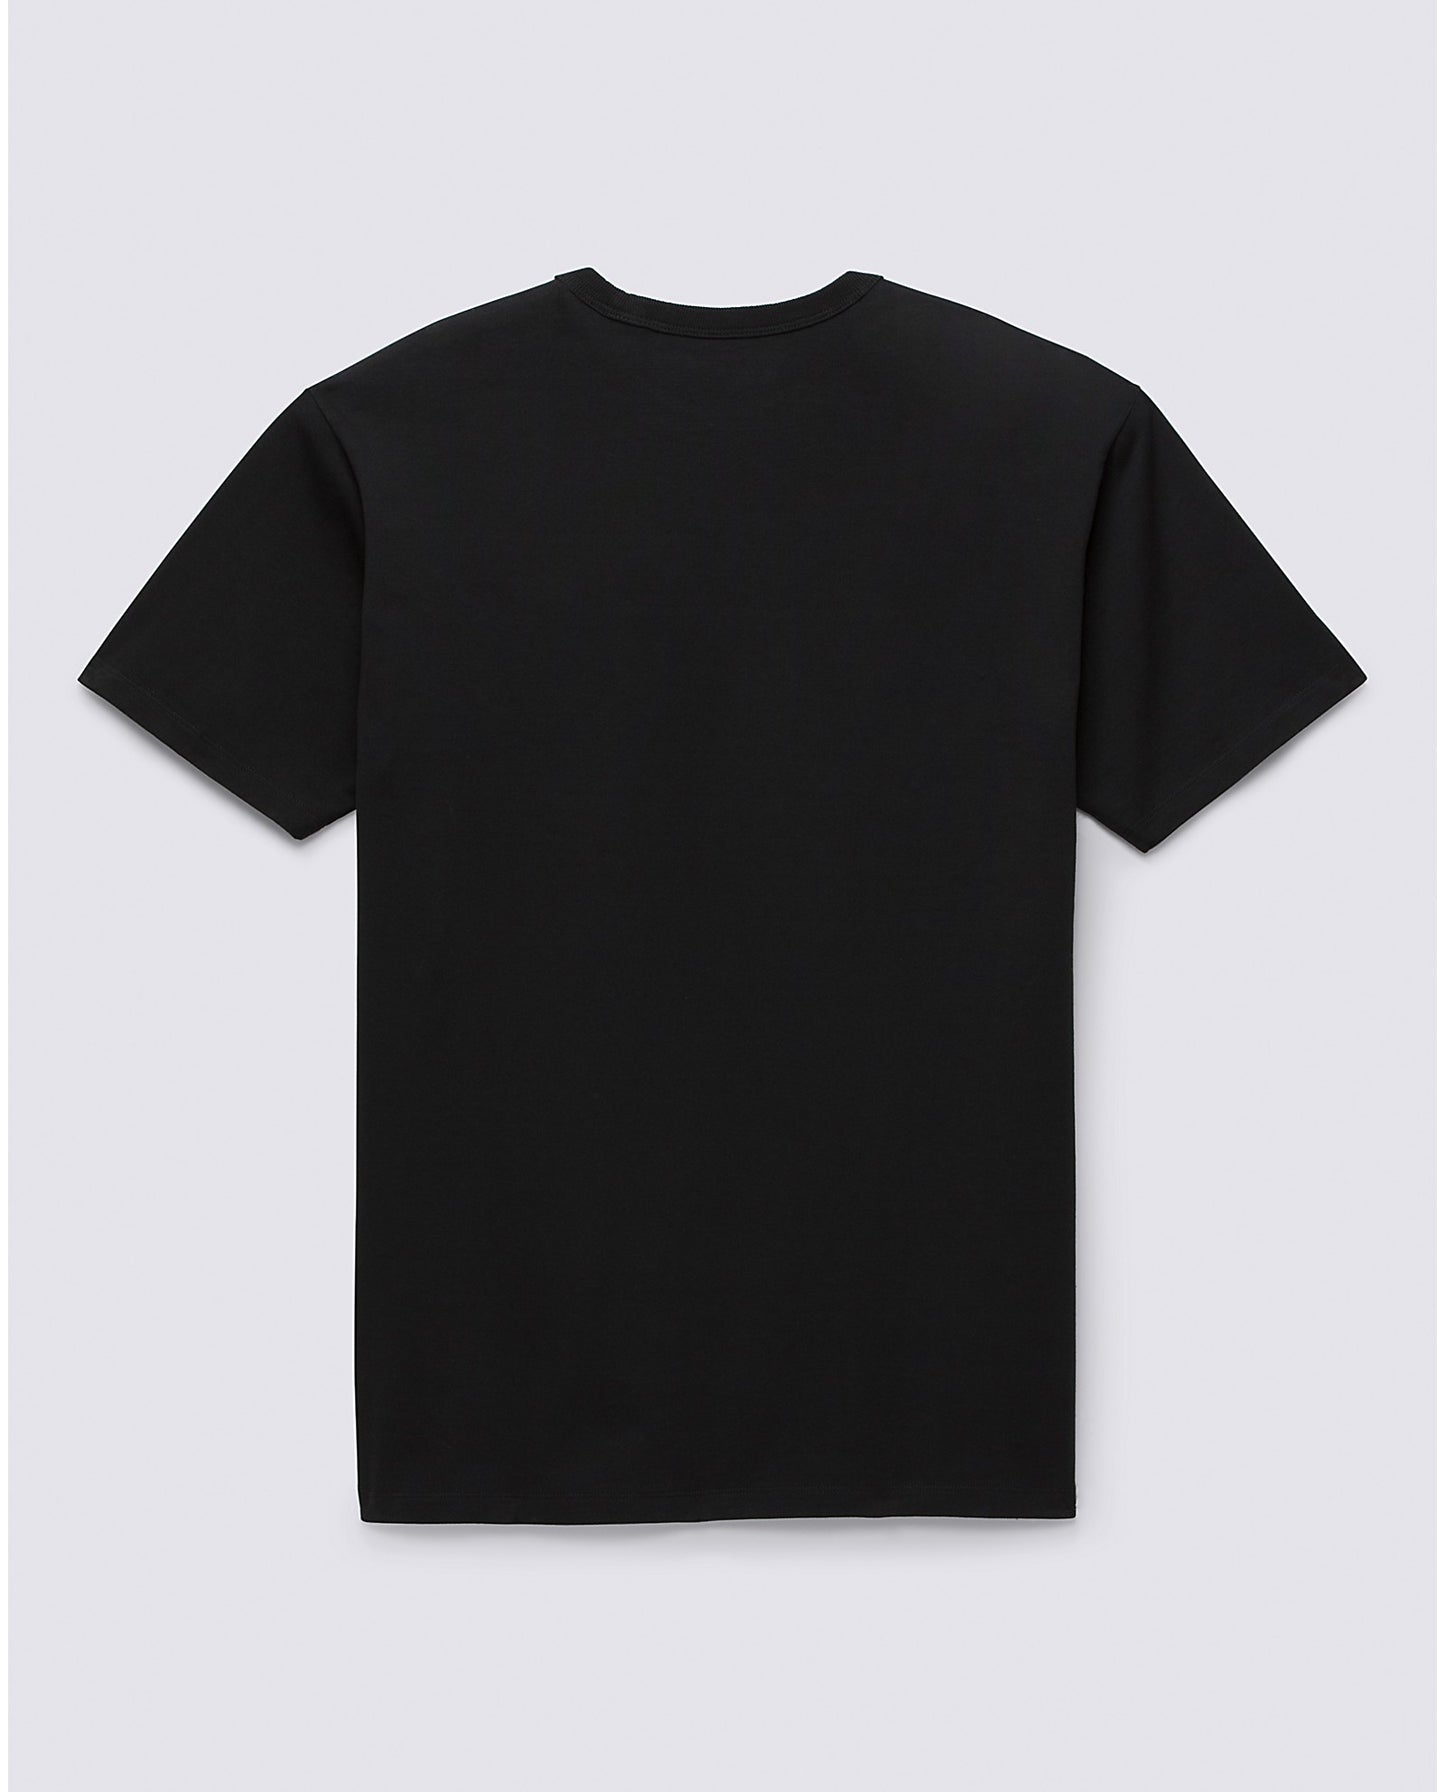 Off The Wall Graphic S/S Pocket Tee Shirt Blk/Gld Fusion(size options listed)